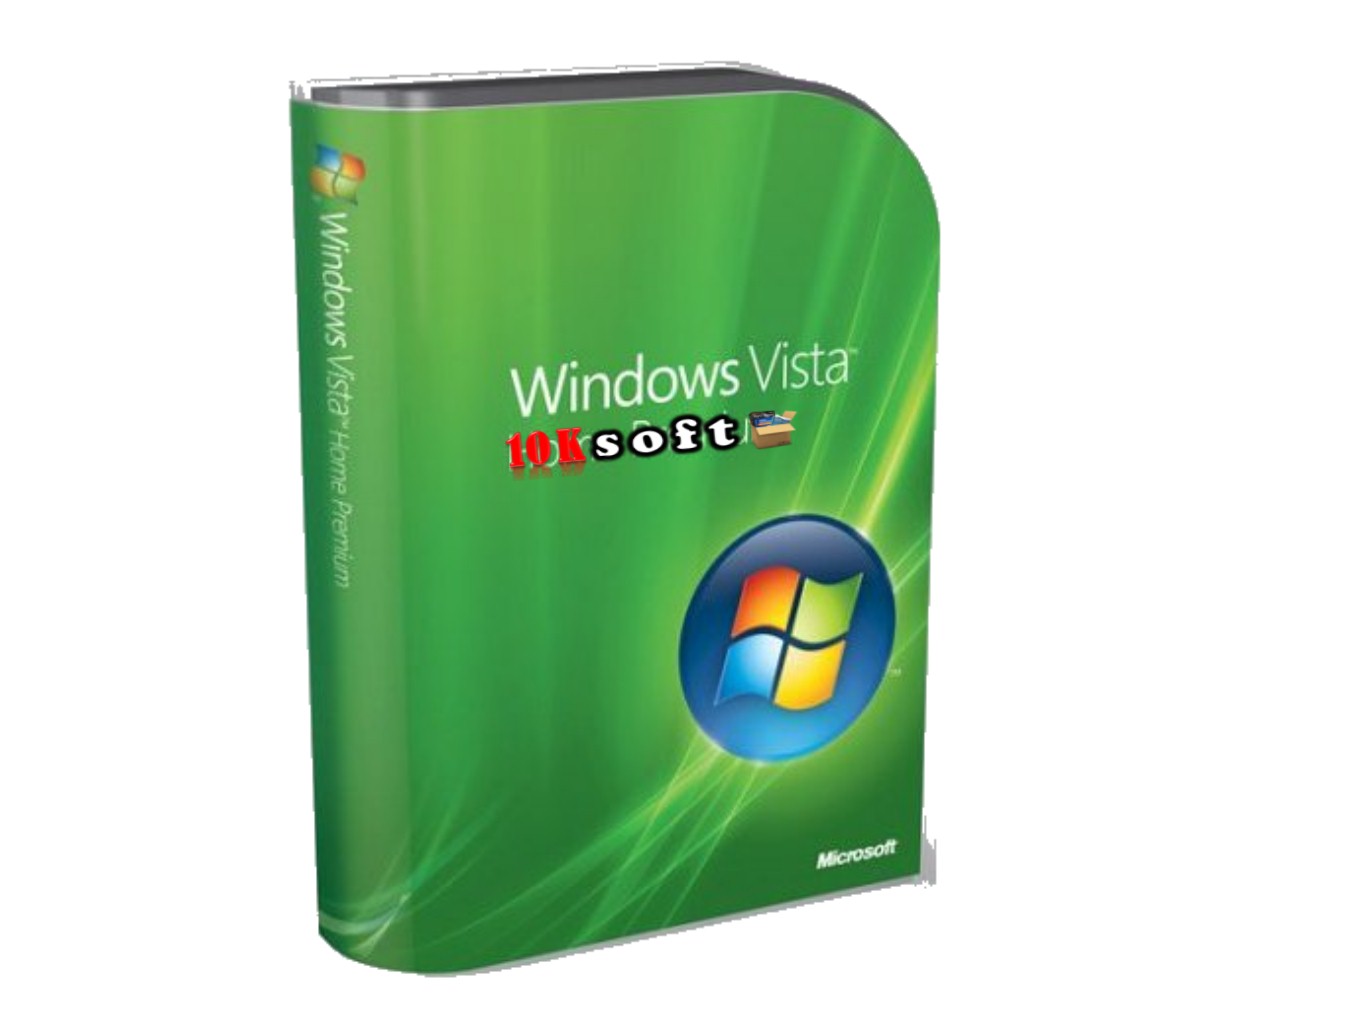 Windows xp embedded bootable iso download